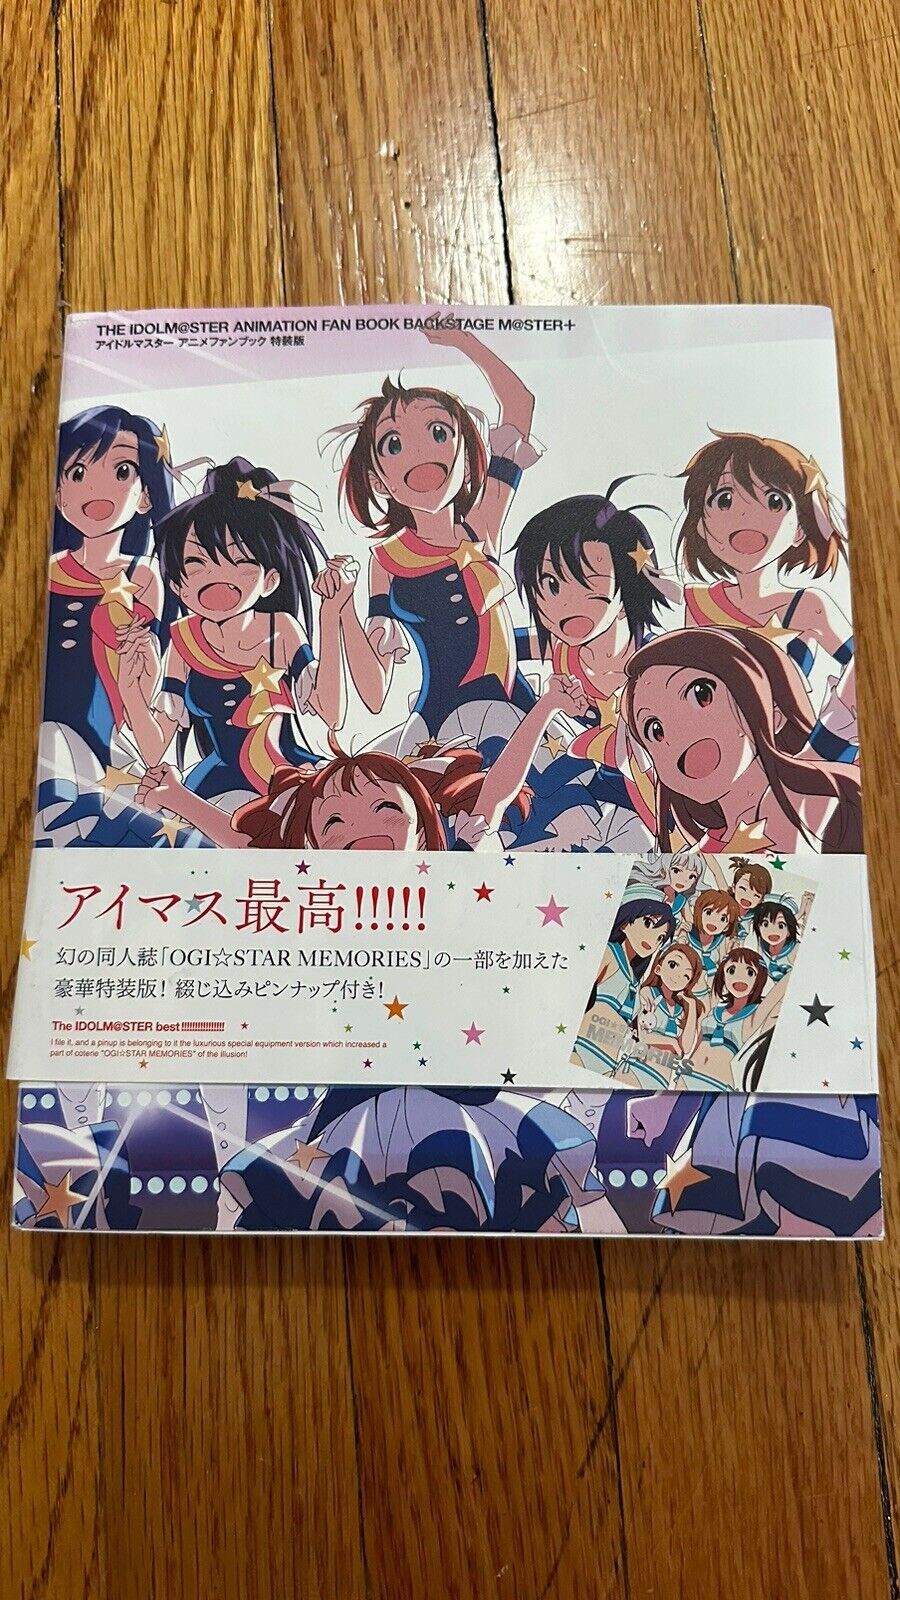 The Idolmaster Animation Fan Book Backstage Master Special Edition